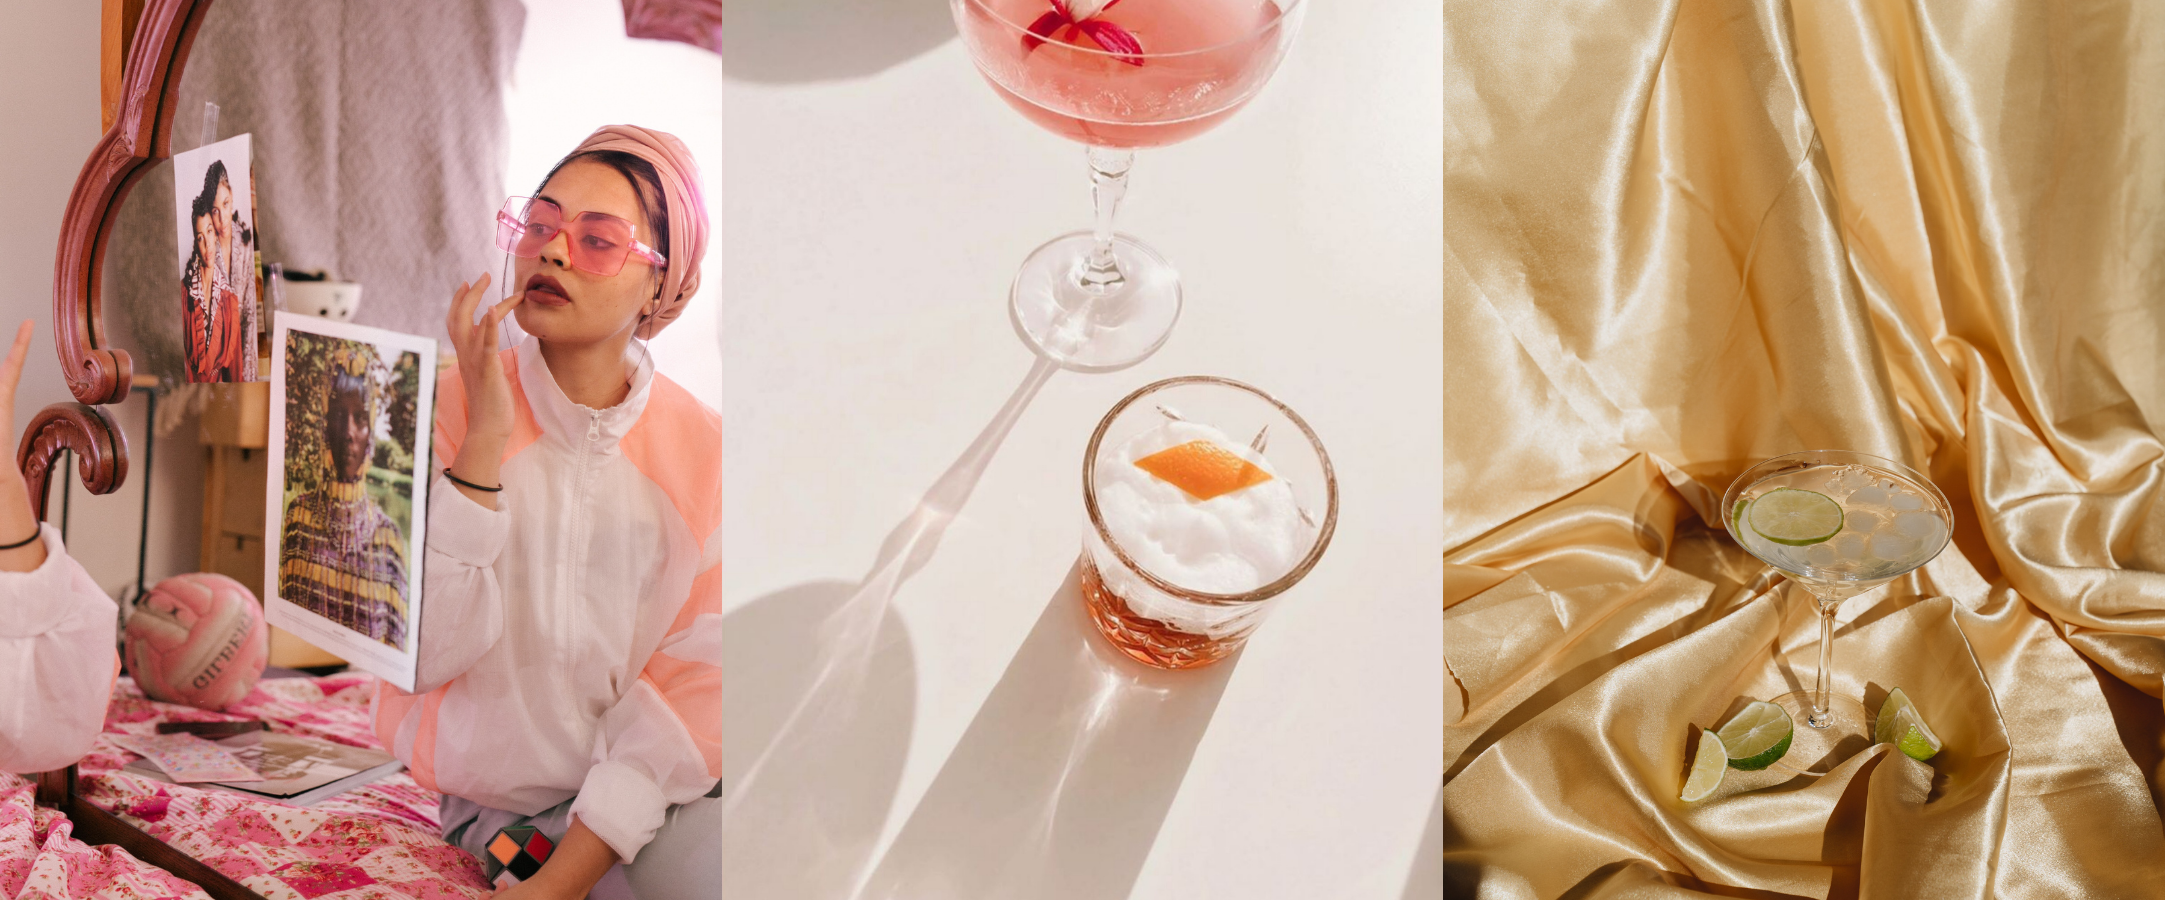 Image is of three different images the first a young woman in a pink bedroom, wearing pink sunglasses, applying pink lipstick. The second is a pink cocktail in a coup glass against a white background. The third a cocktail against a gold backdrop with limes.